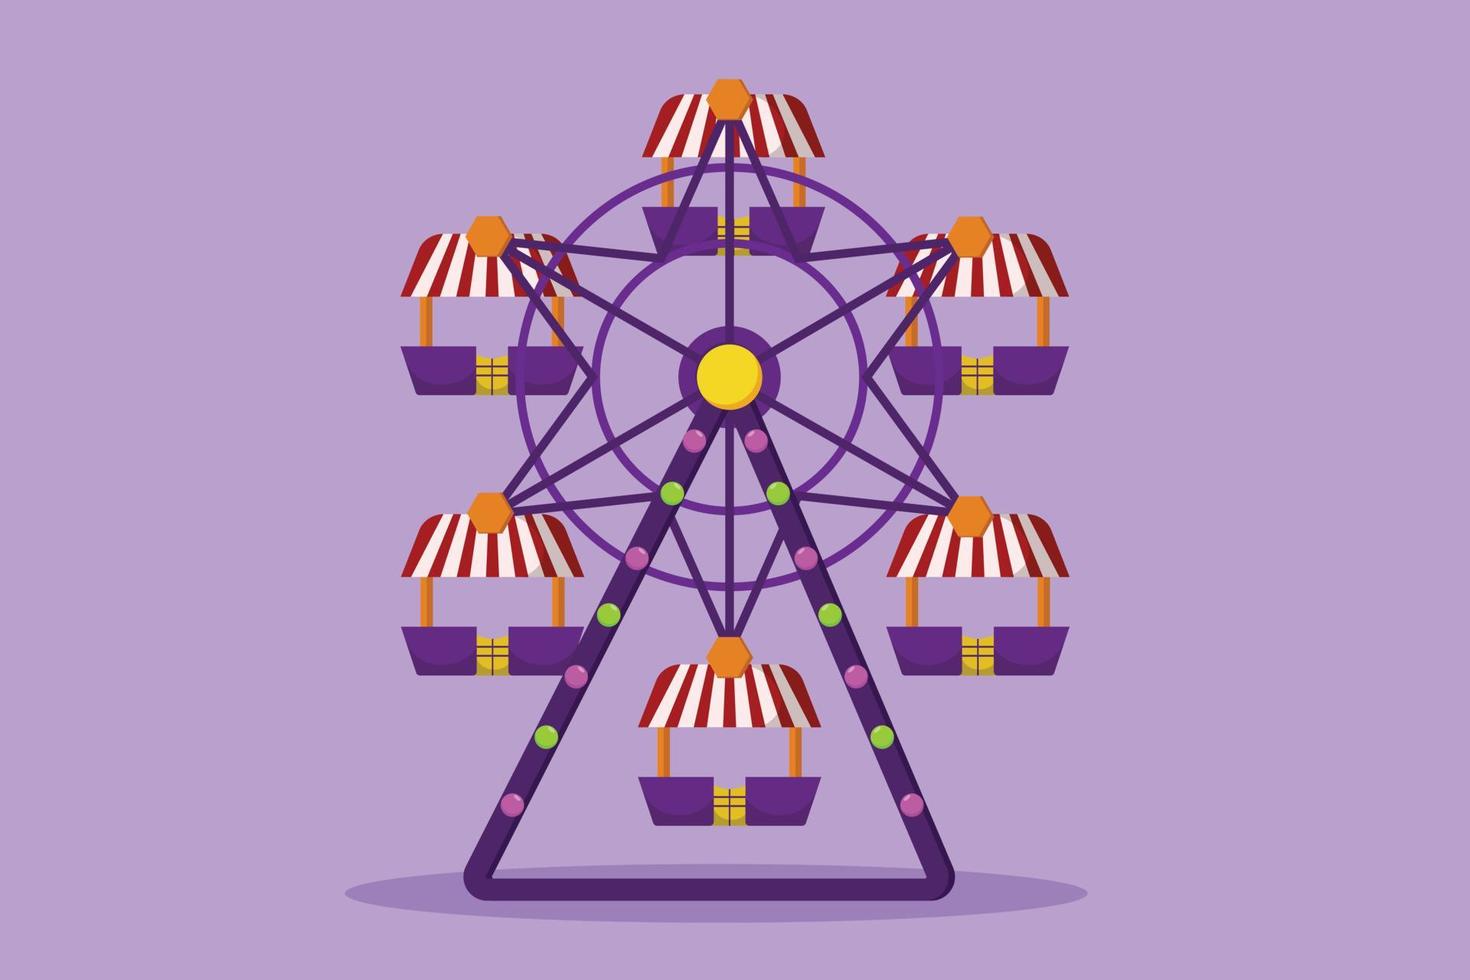 Cartoon flat style drawing ferris wheel in amusement park, circular circle turning high in sky. Fun play at public funfair festival. Playground that children like. Graphic design vector illustration